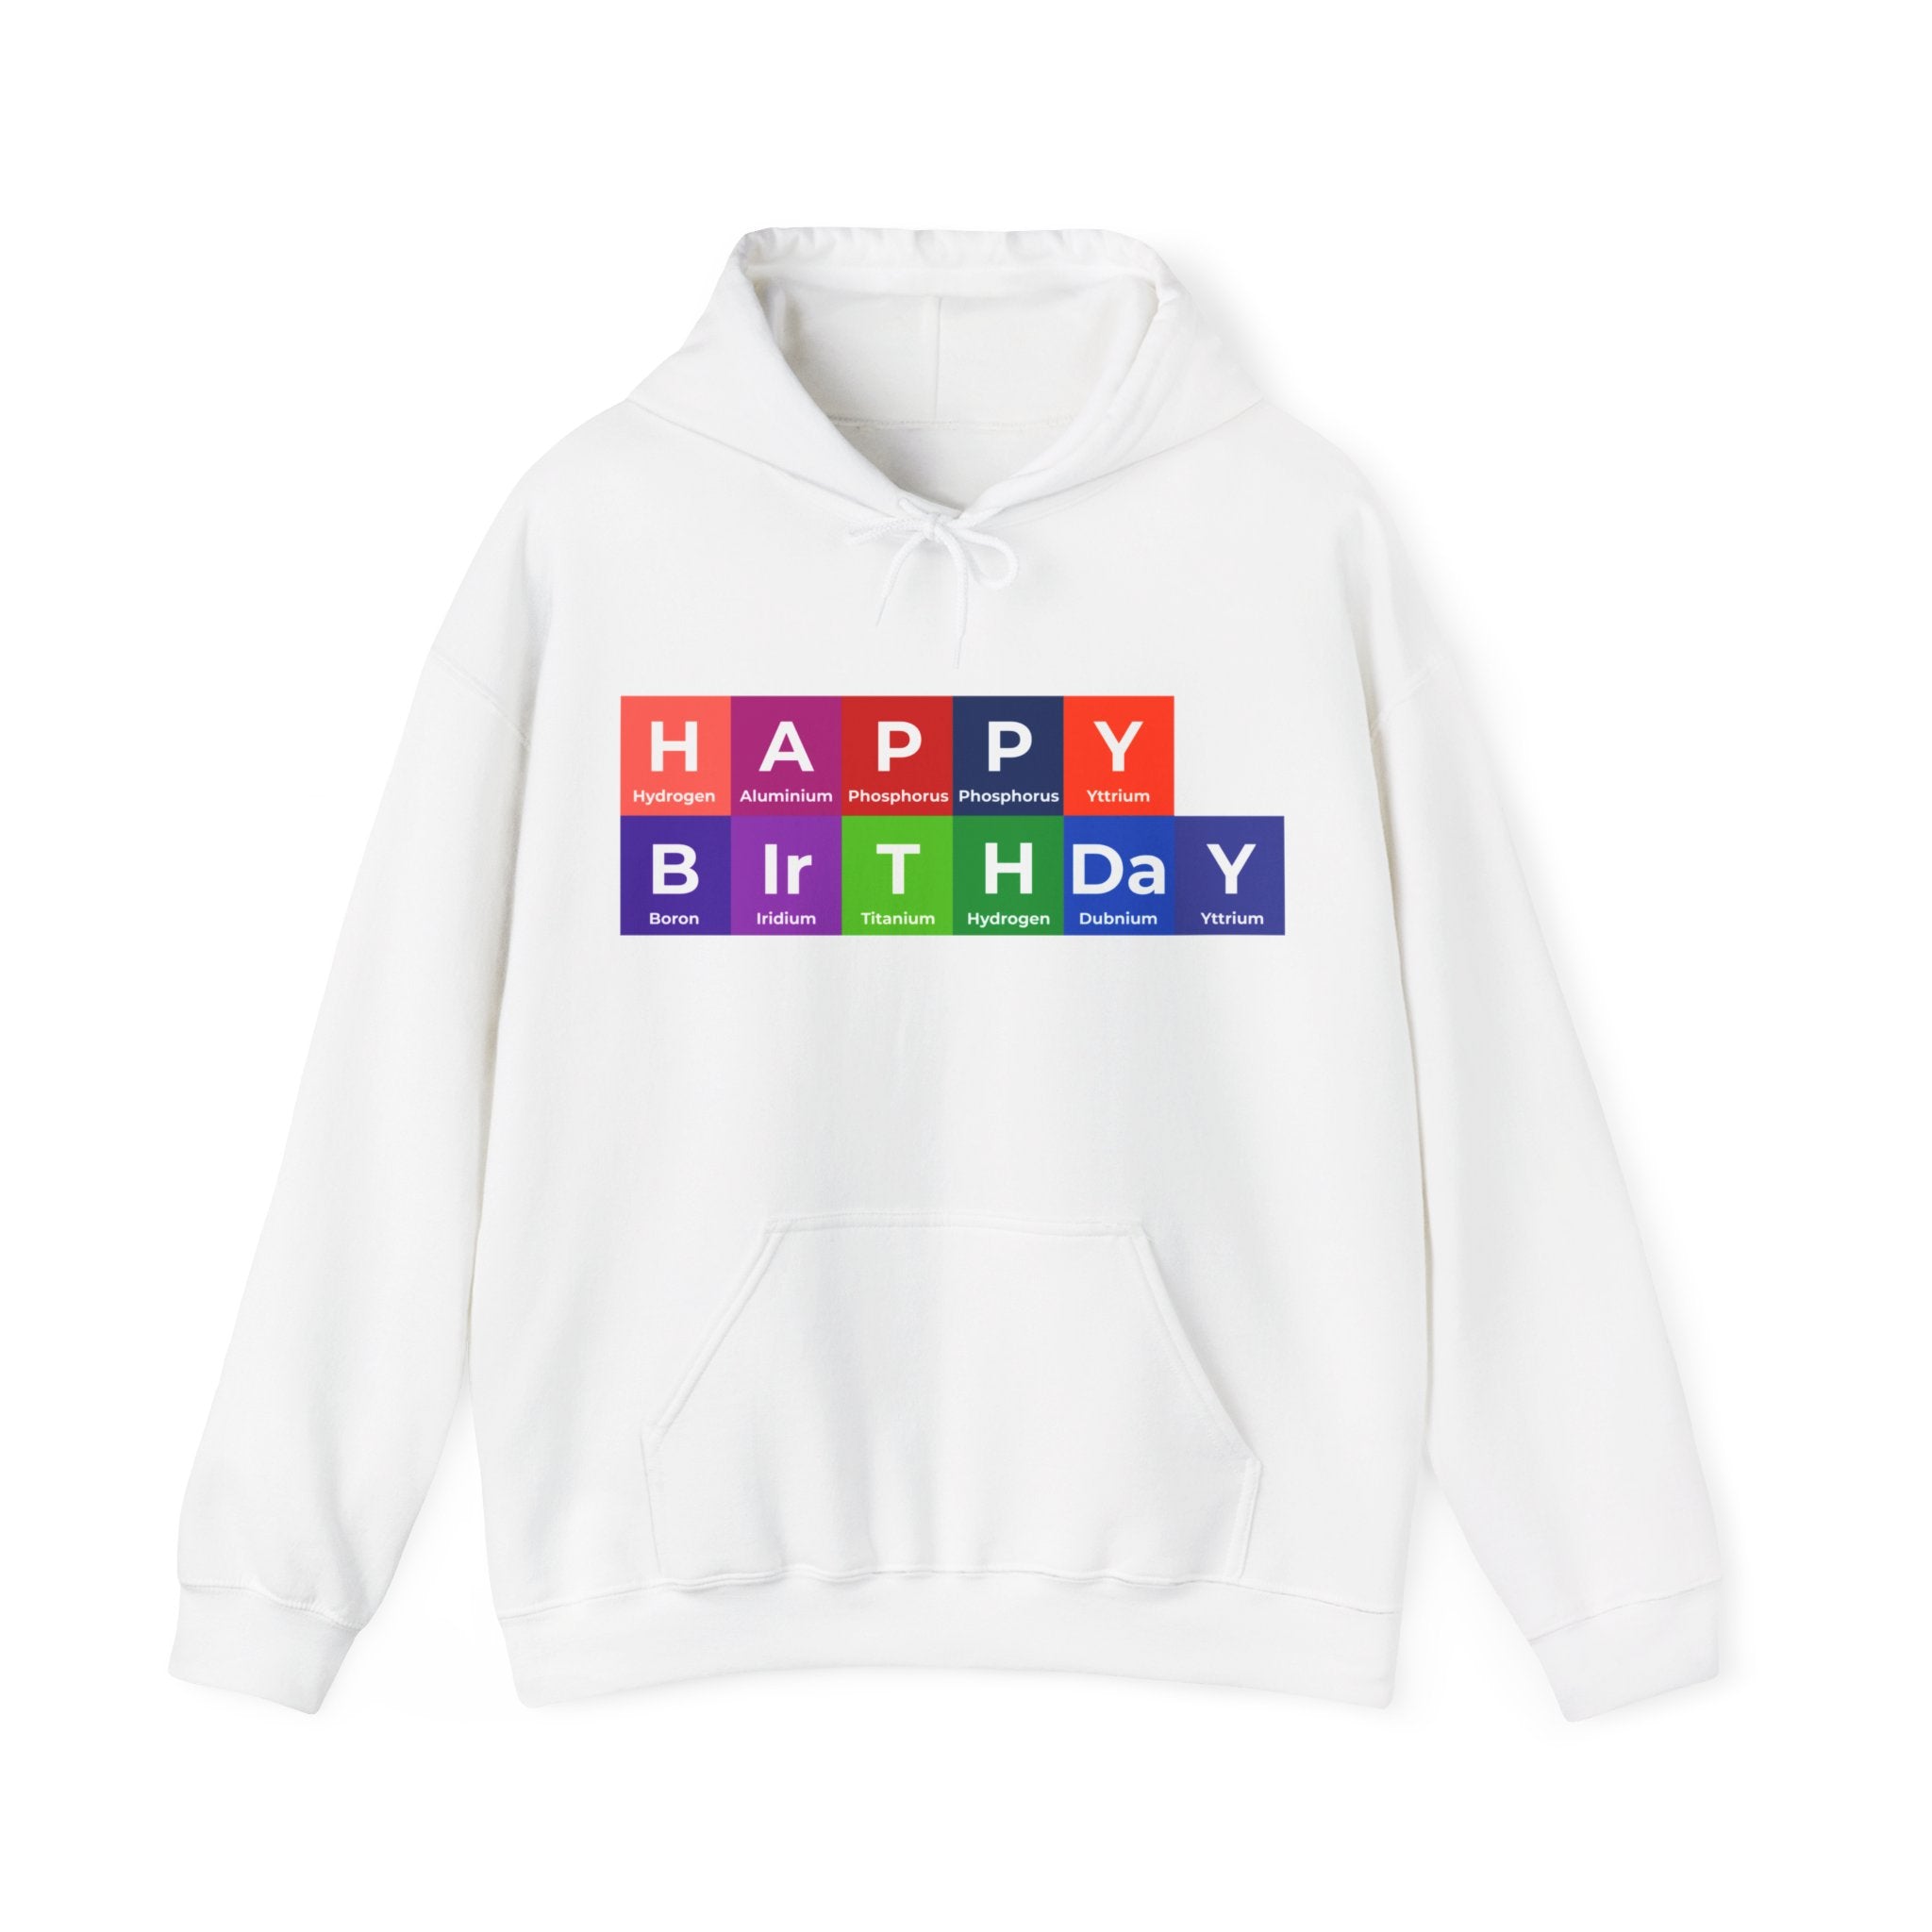 White, comfortable **Happy Birthday - Hooded Sweatshirt** featuring "Happy Birthday" spelled out with colorful squares that resemble periodic table elements. Each square contains a chemical symbol and its name, offering a chic touch to your casual wardrobe.